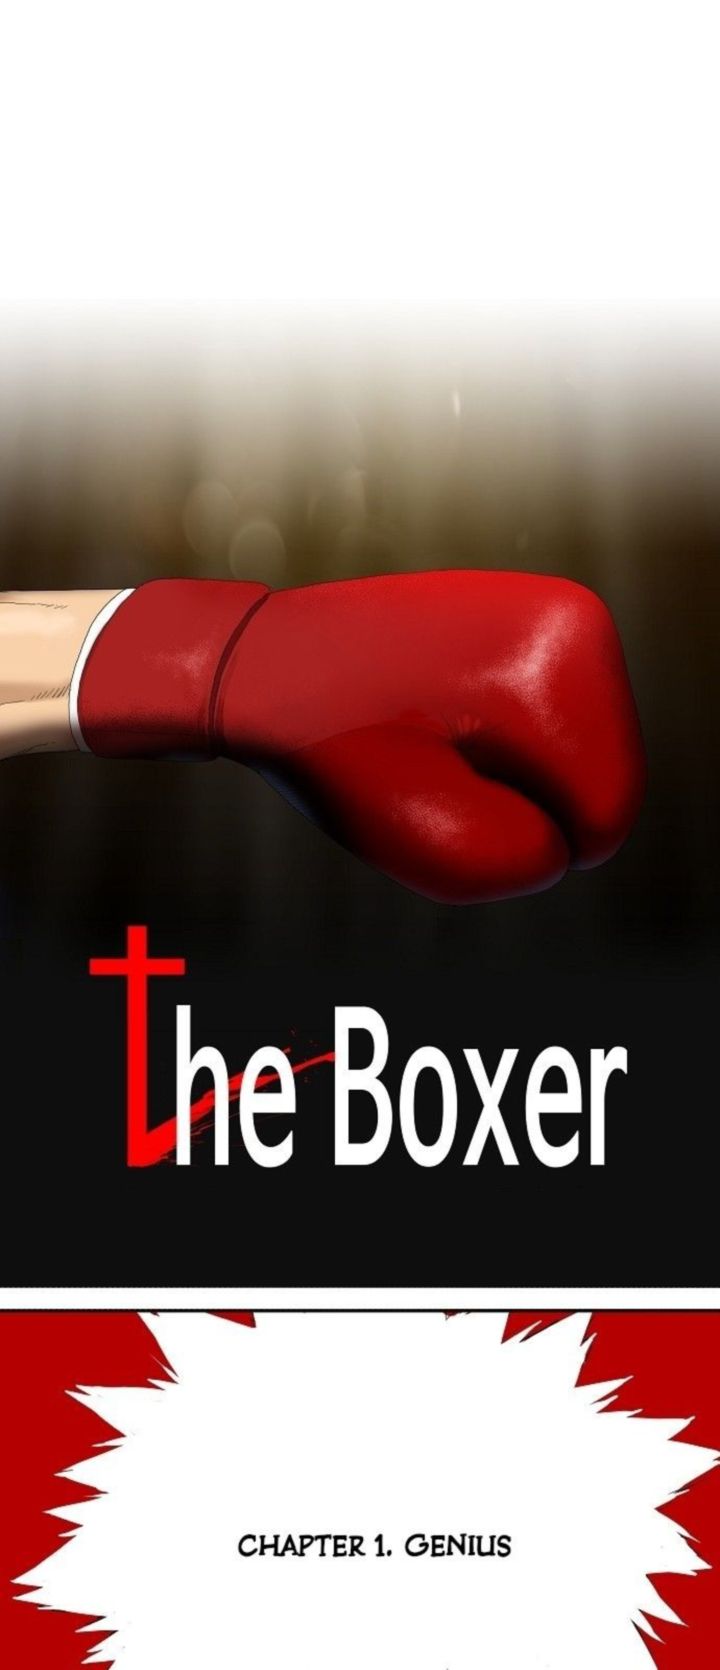 The Boxer 1 8